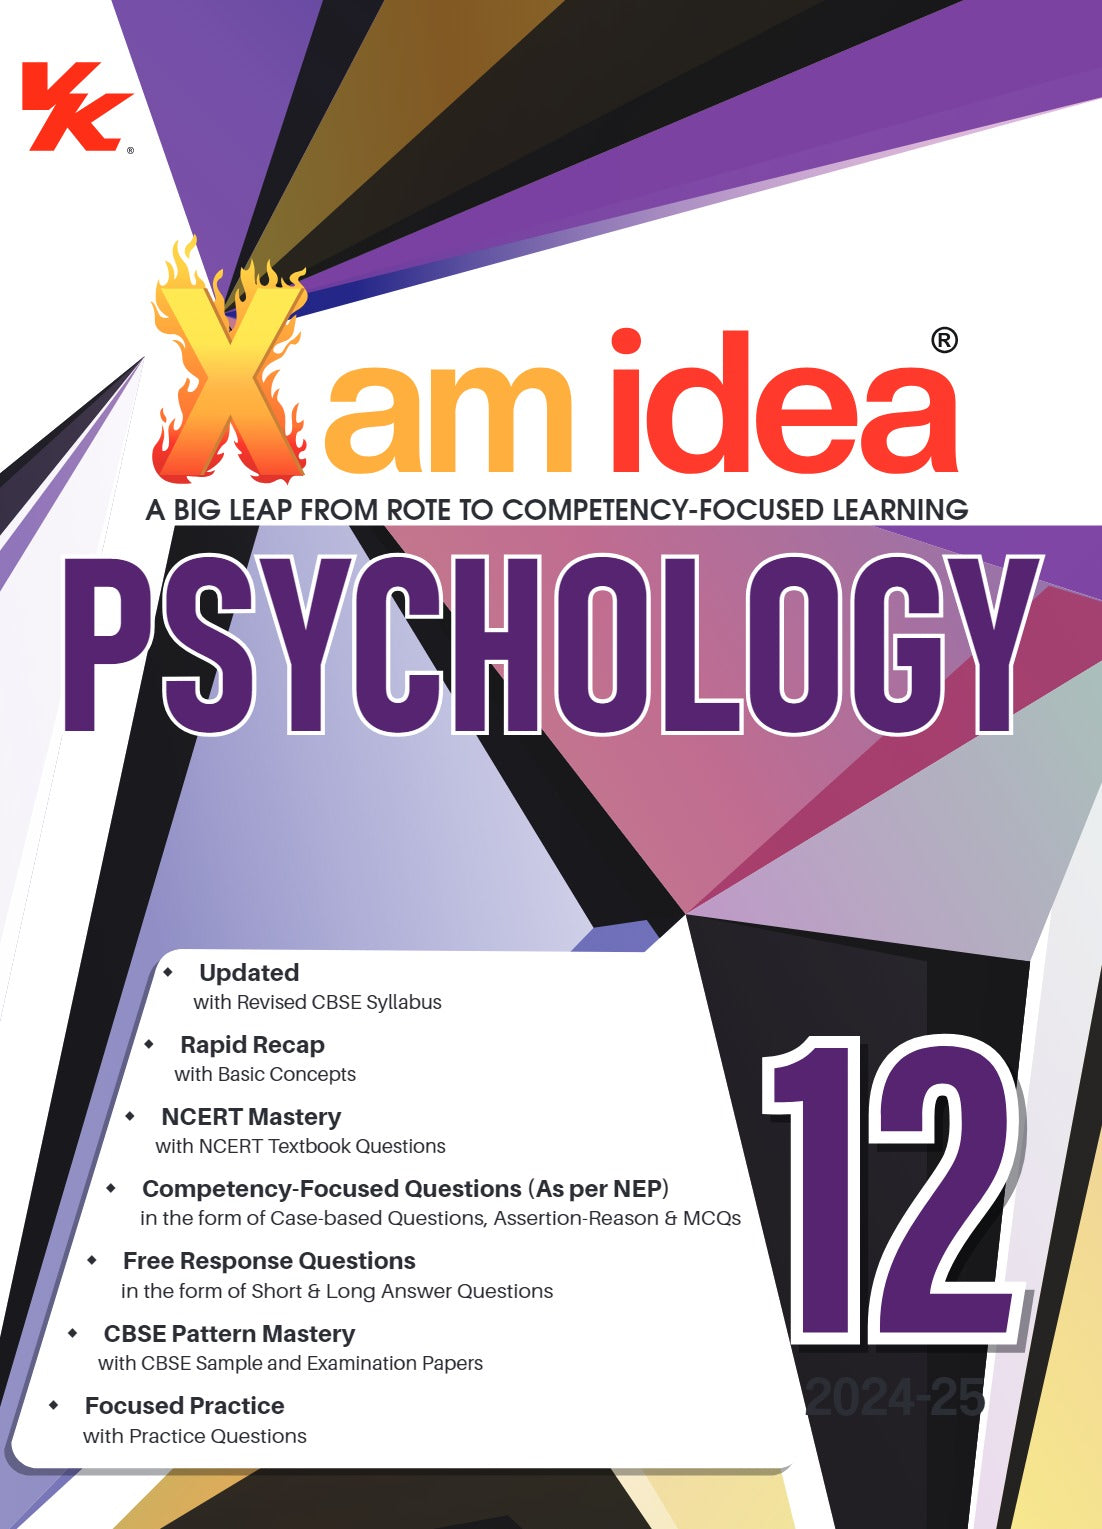 Xam idea Psychology Class 12 Book | CBSE Board | Chapterwise Question Bank | Based on Revised CBSE Syllabus | NCERT Questions Included | 2024-25 Exam